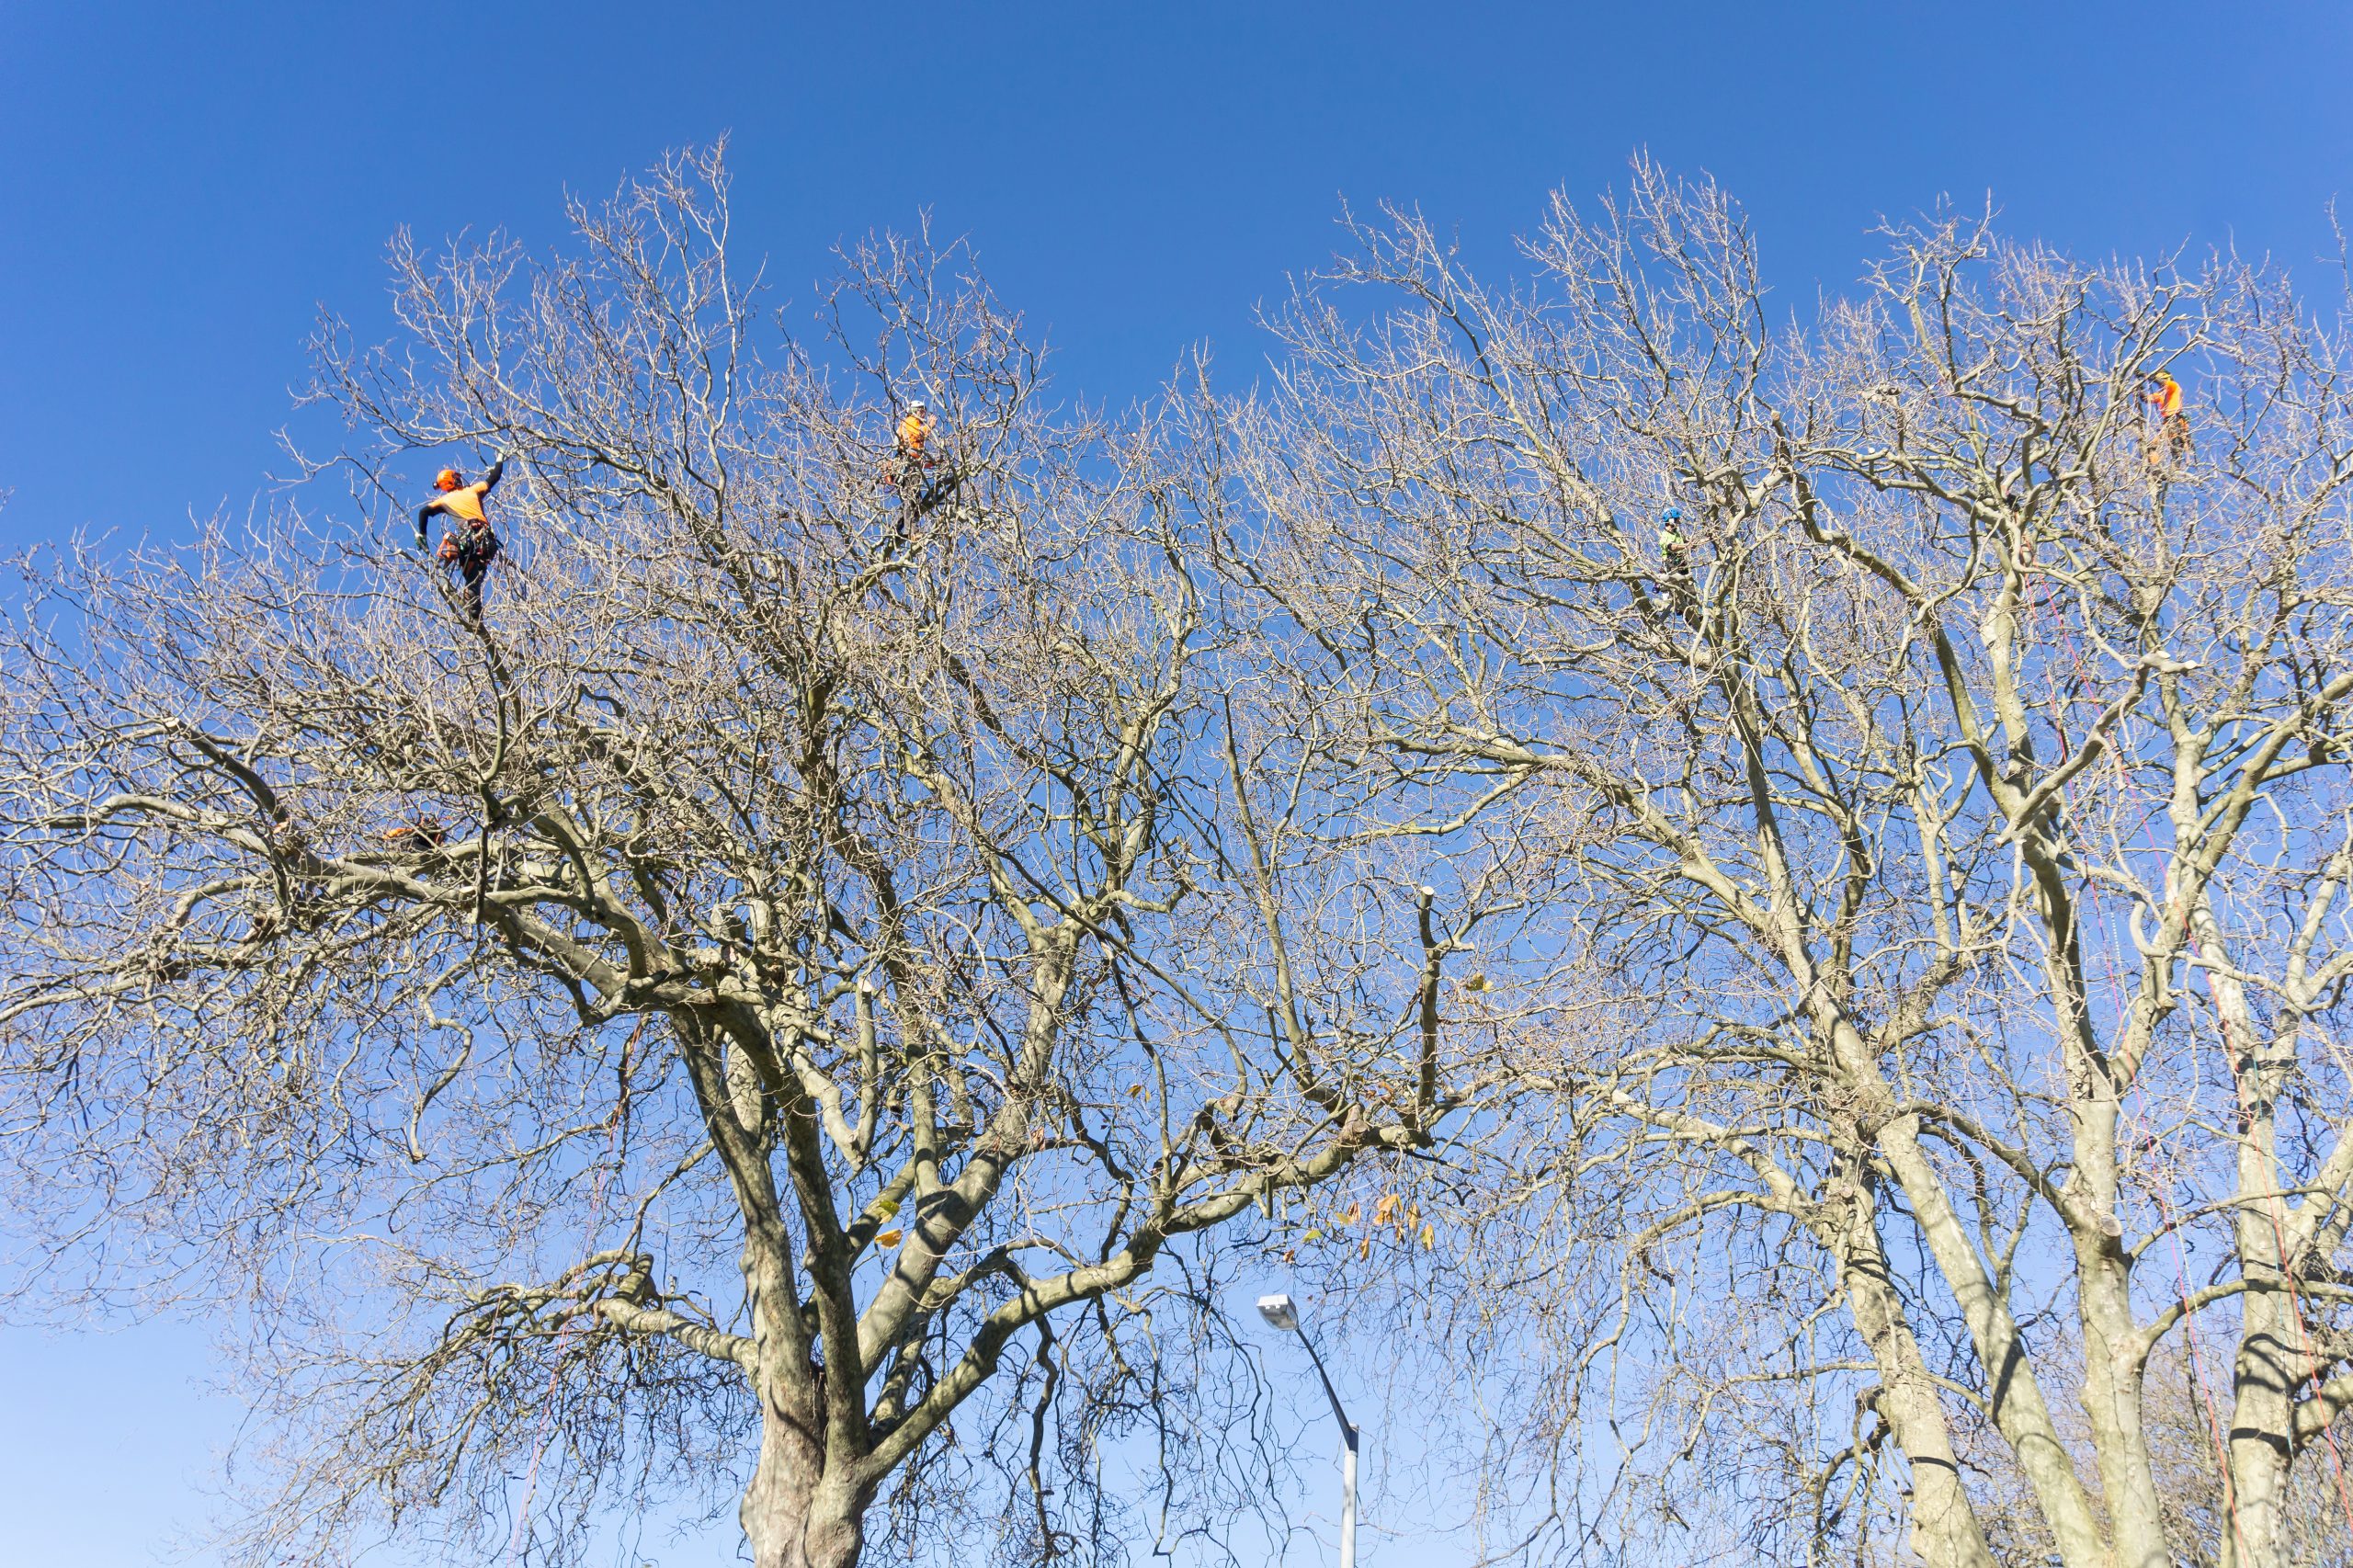 Three arborist high in top of leafless London Plane trees supported by safety ropes trimming branches in Tauranga New Zealand July 2018